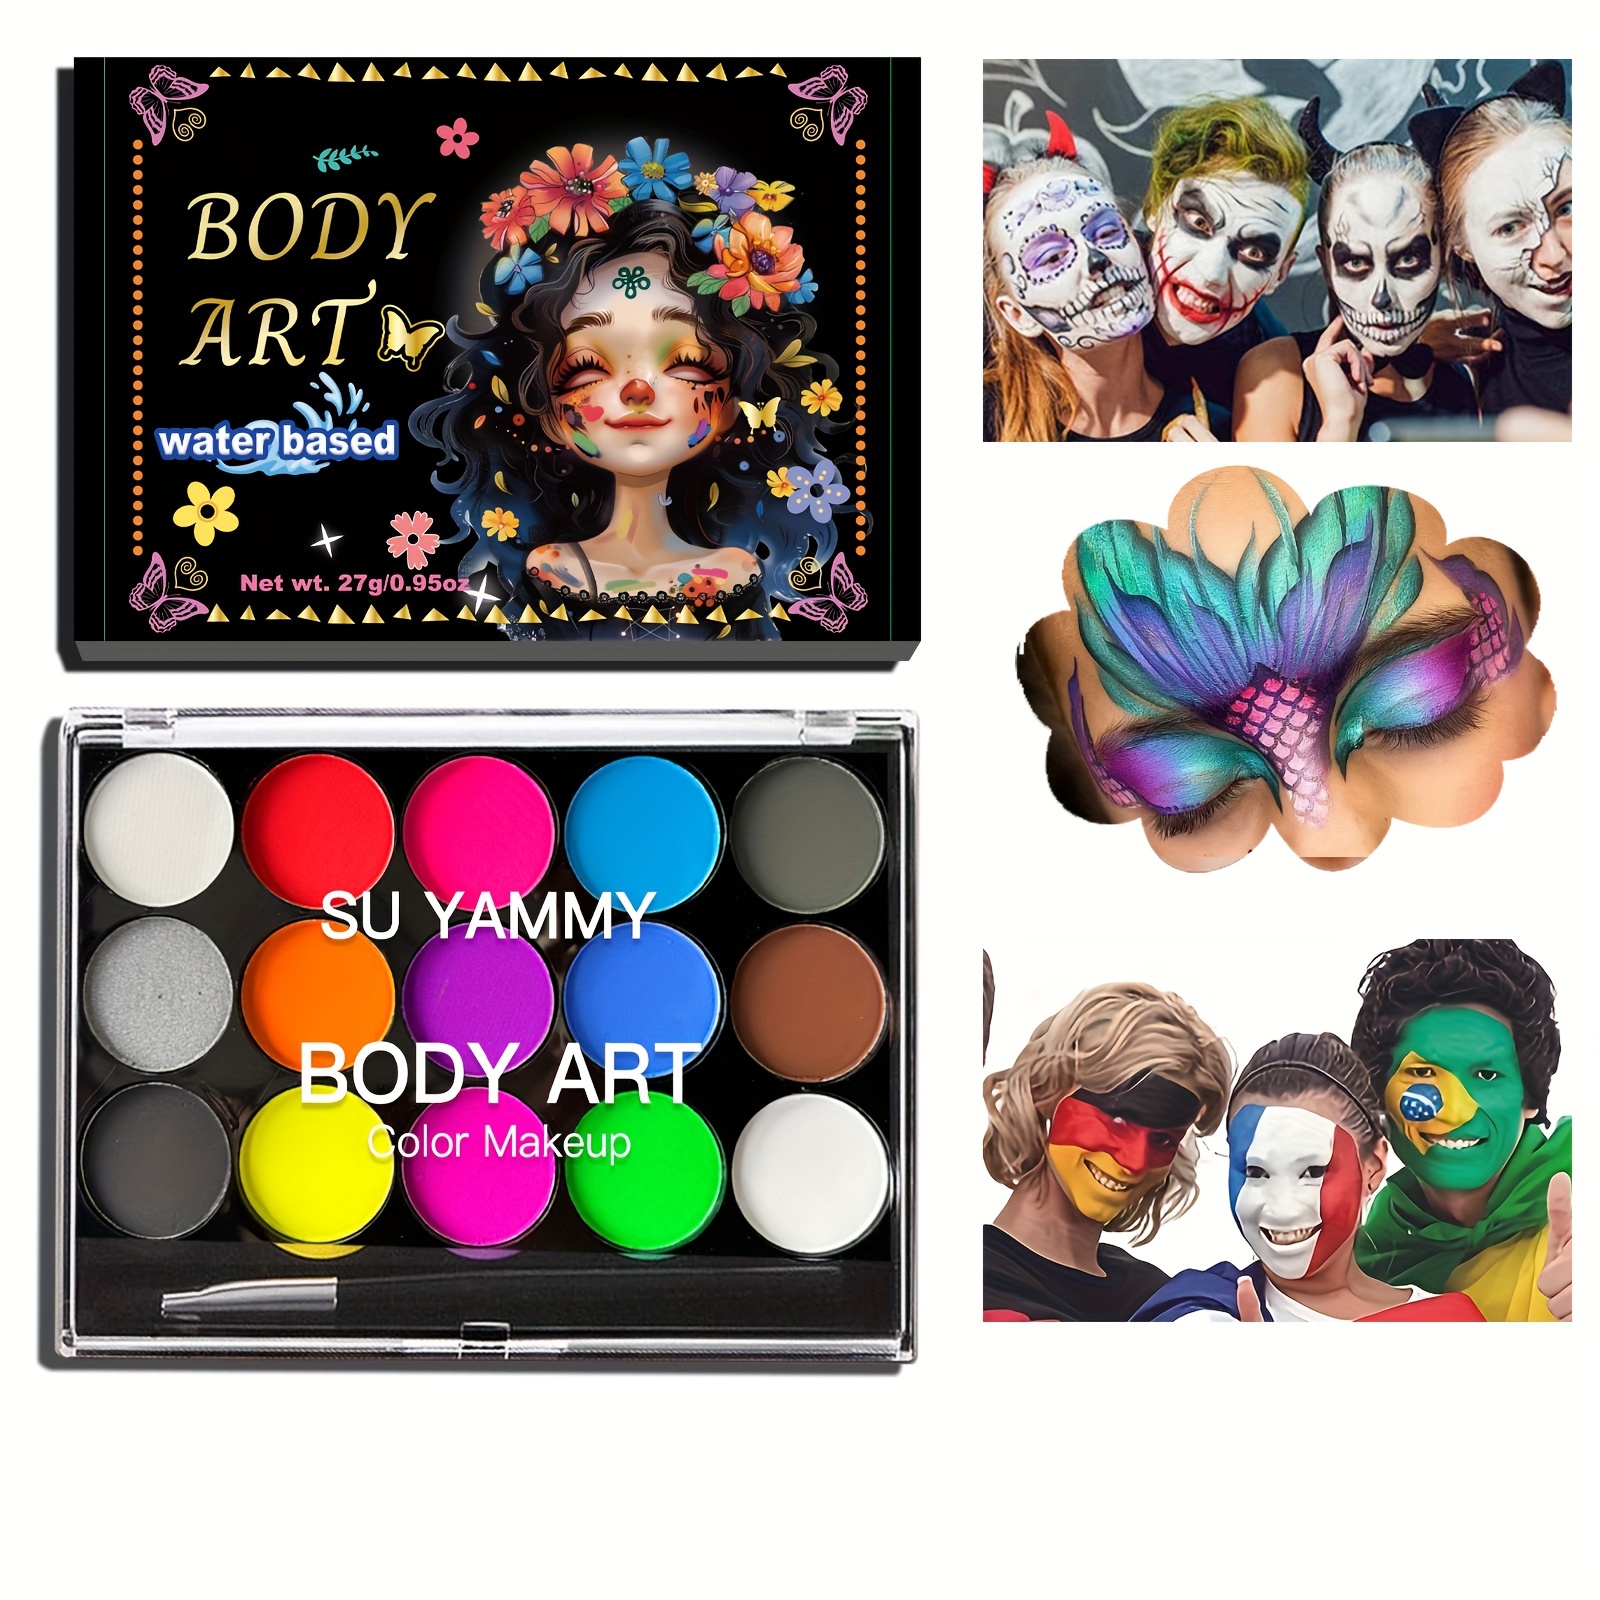 

Su Yammy Body Paint Palette - Water-based Makeup Color Kit, 15 Vibrant And Pearlescent Colors, Safe & Non-toxic Face And Body Art For Halloween, Cosplay, Parties, Theater And Stage Performance